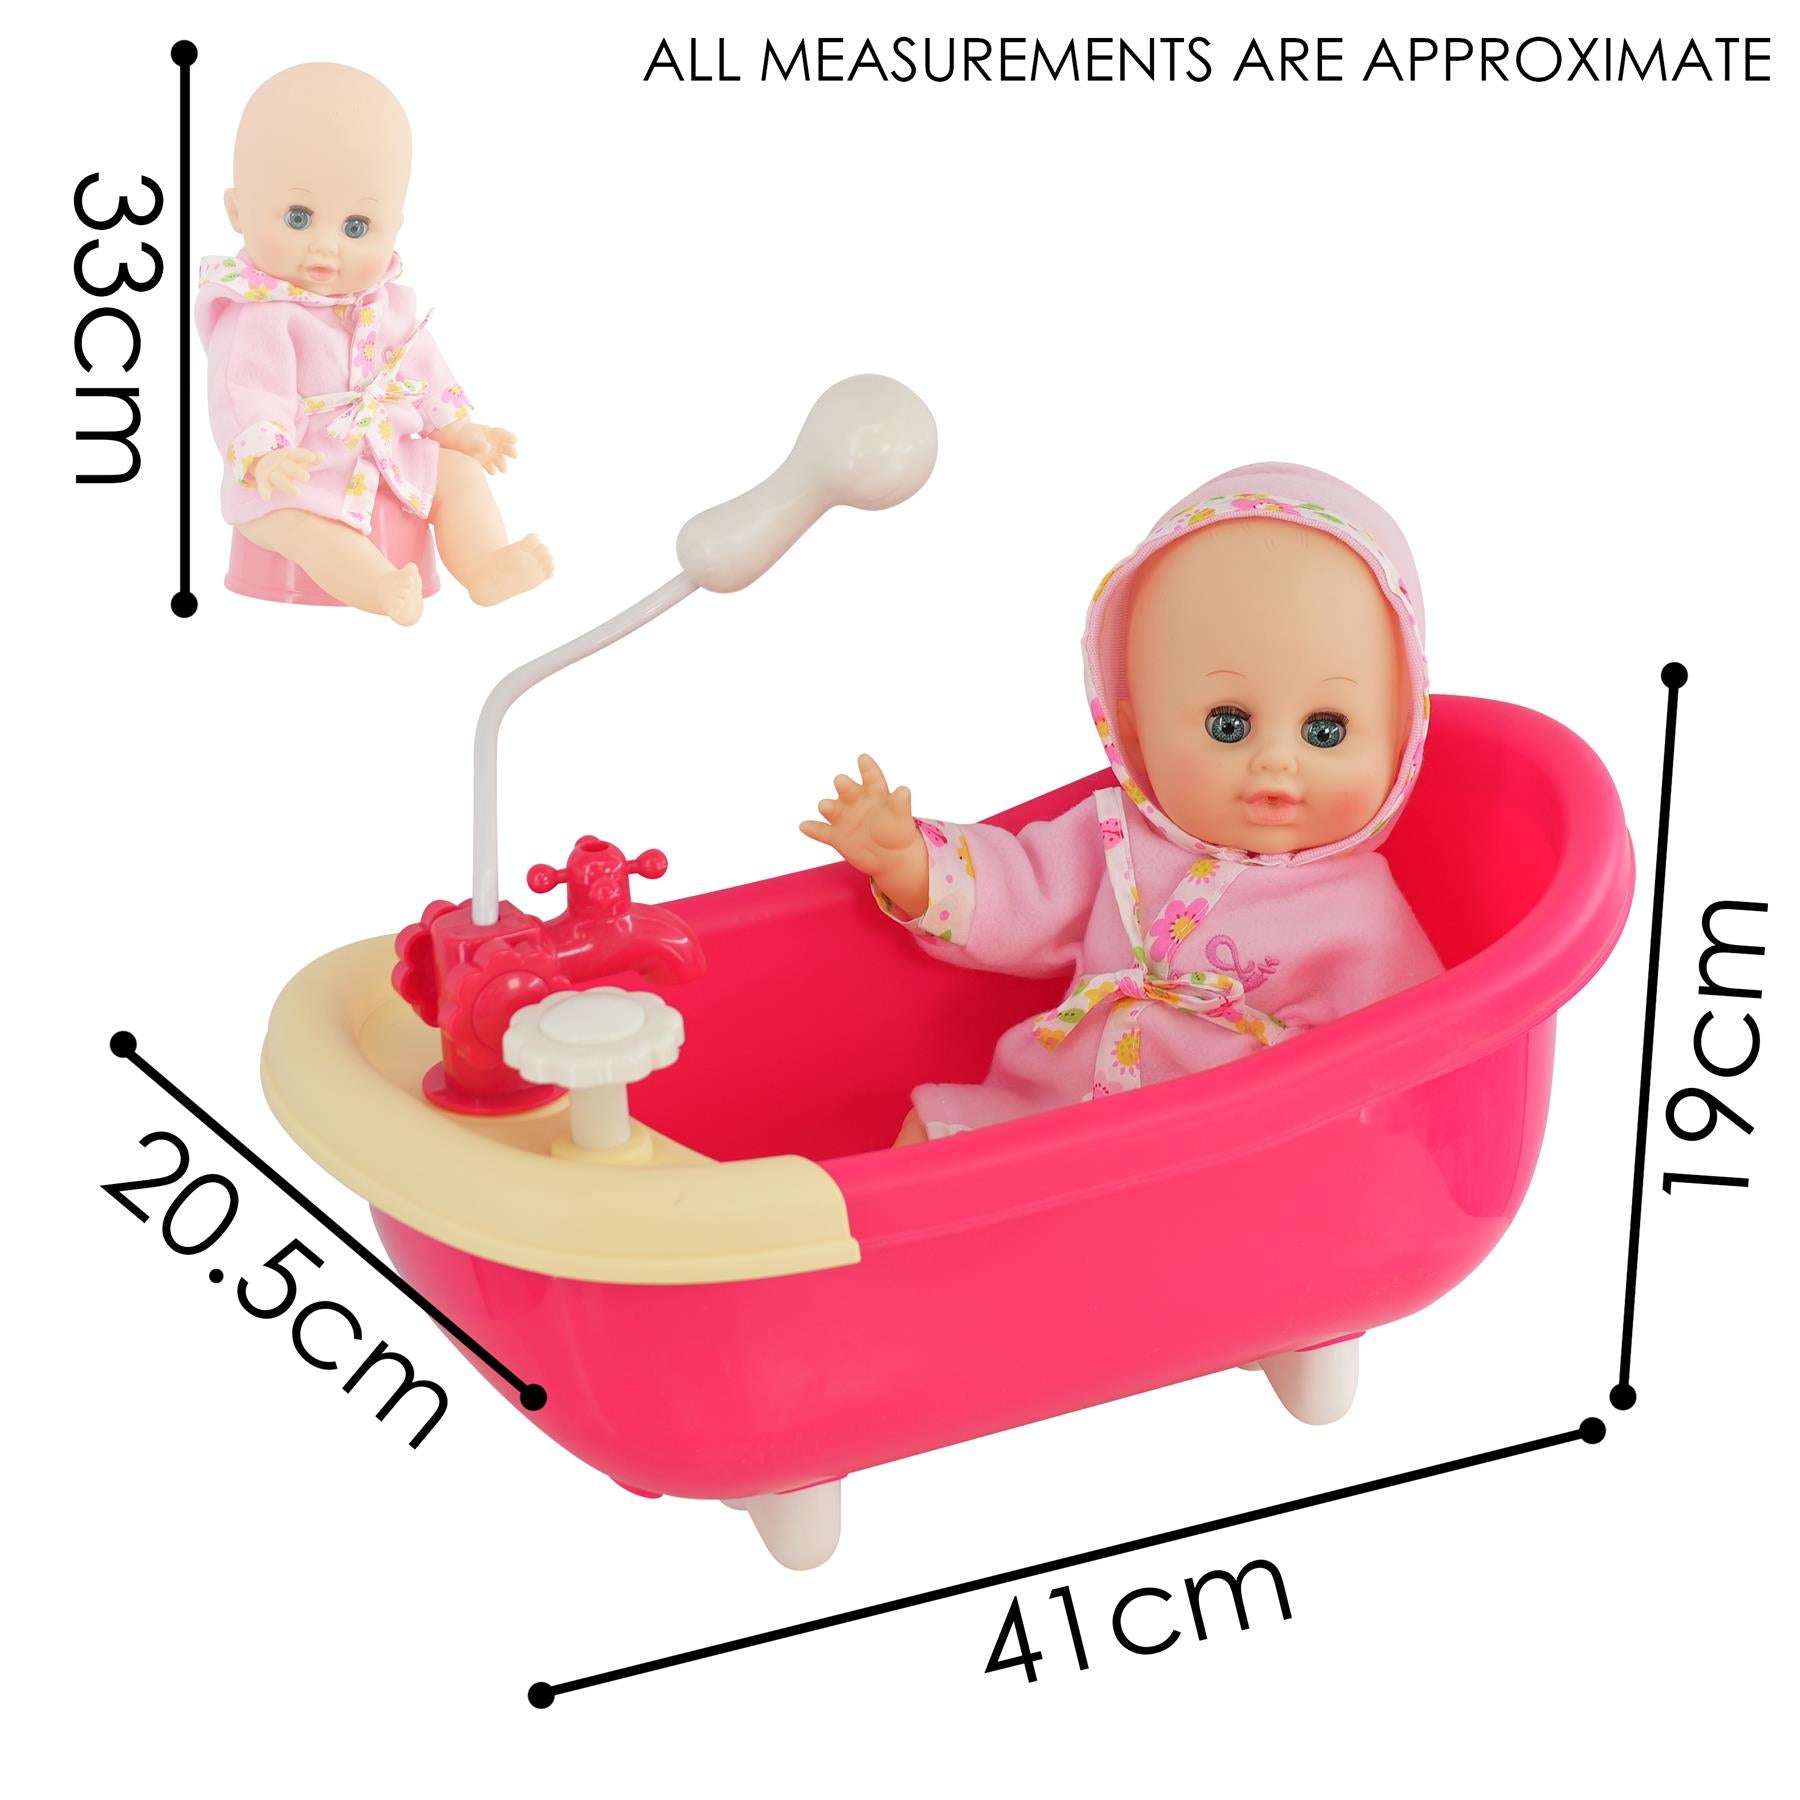 Doll and Bath set with Accessories by BiBi Doll - UKBuyZone